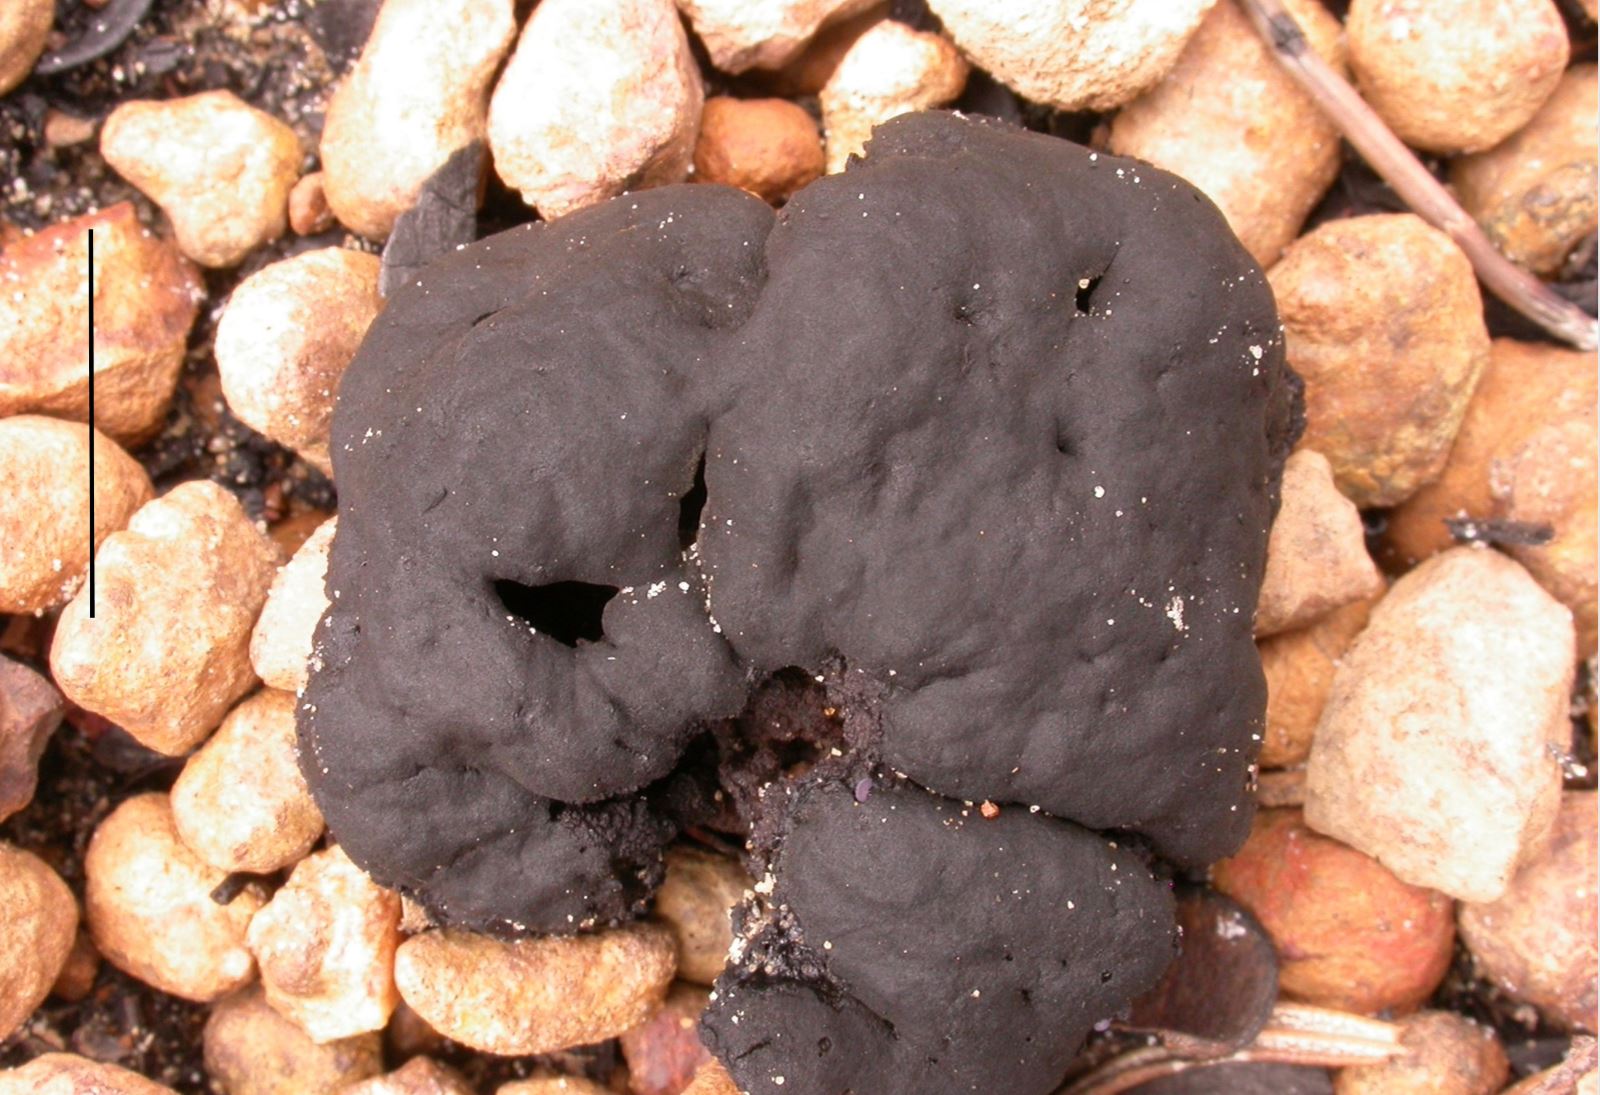 Kangaroo Island fungii, Black Shoe Leather (Antrelloides atroceracea), is a new genus and species, was discovered and described by Professor David Catcheside from Flinders University and State Herbarium research associate Pam Catcheside. 